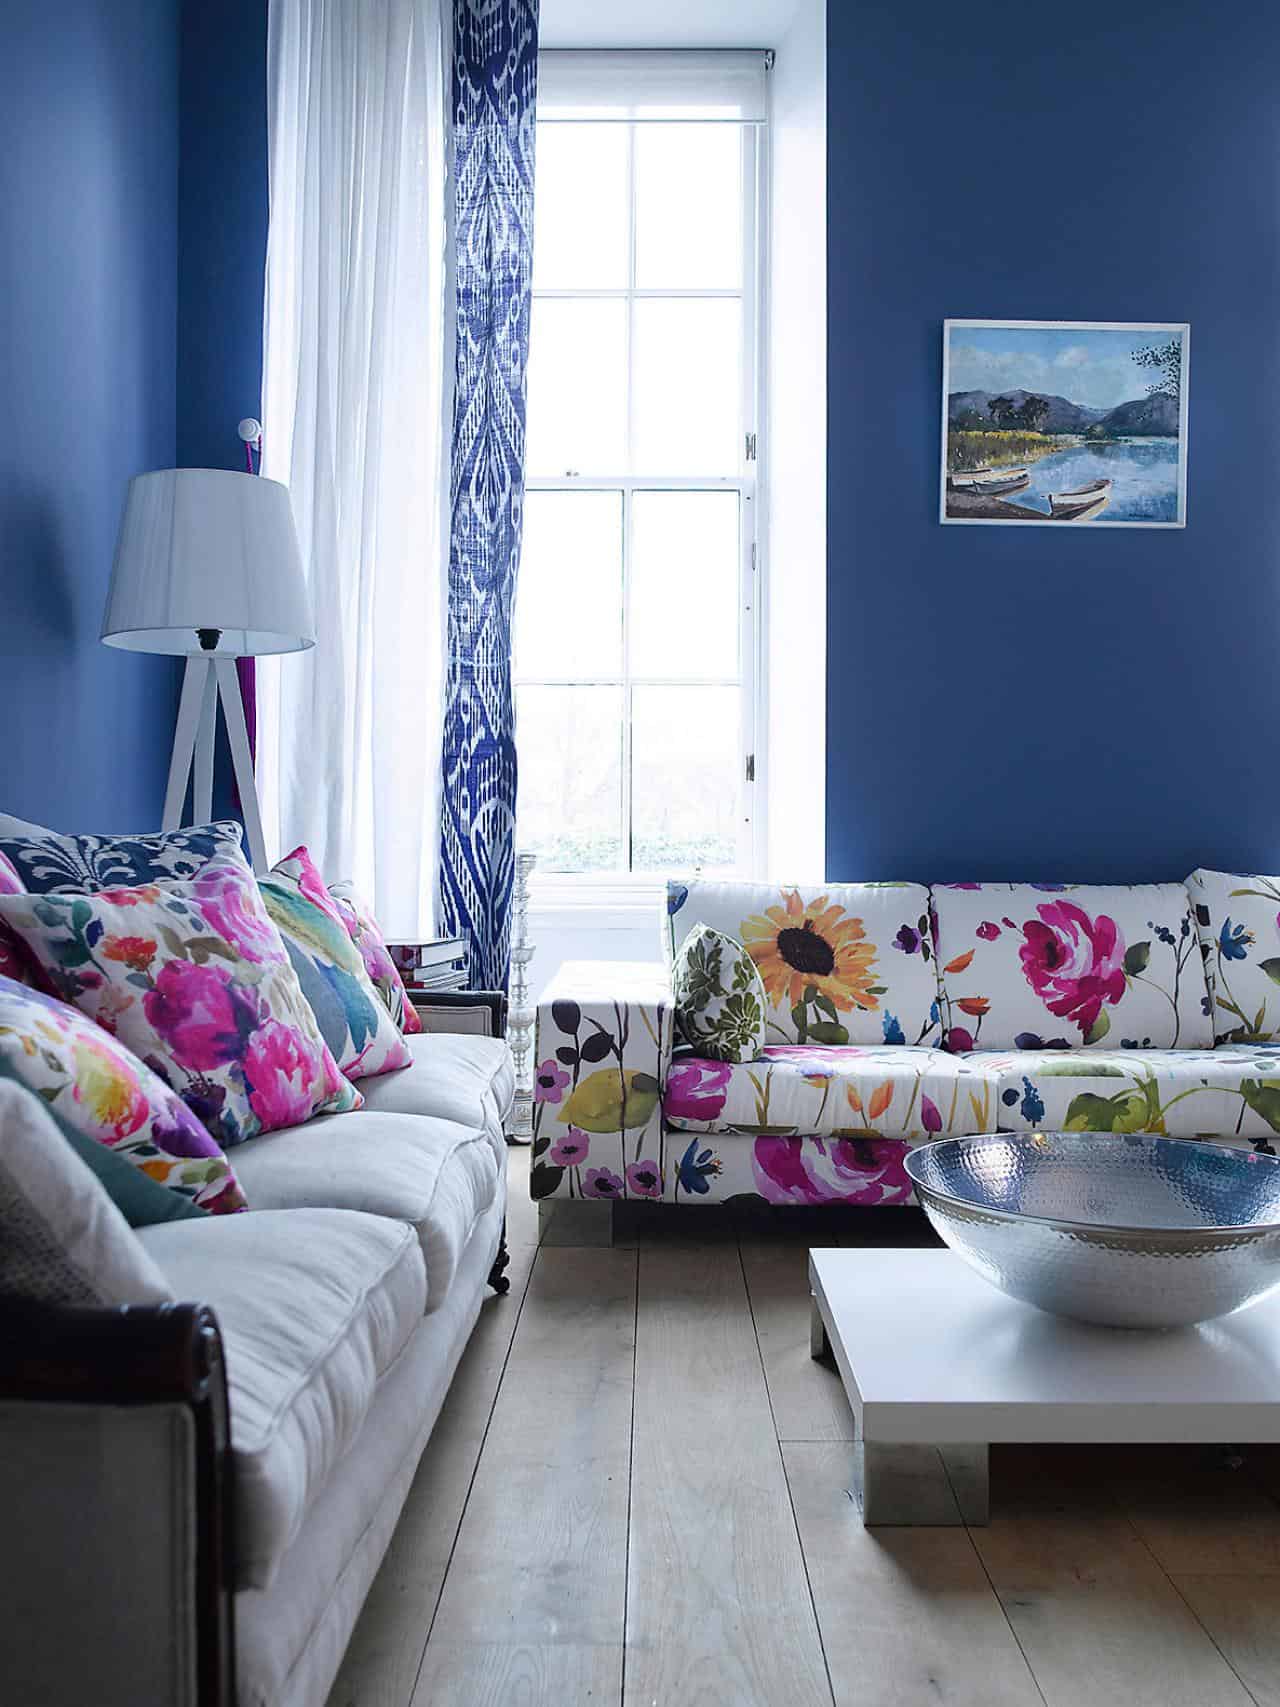 When done properly floral print can be the highlight of any room.